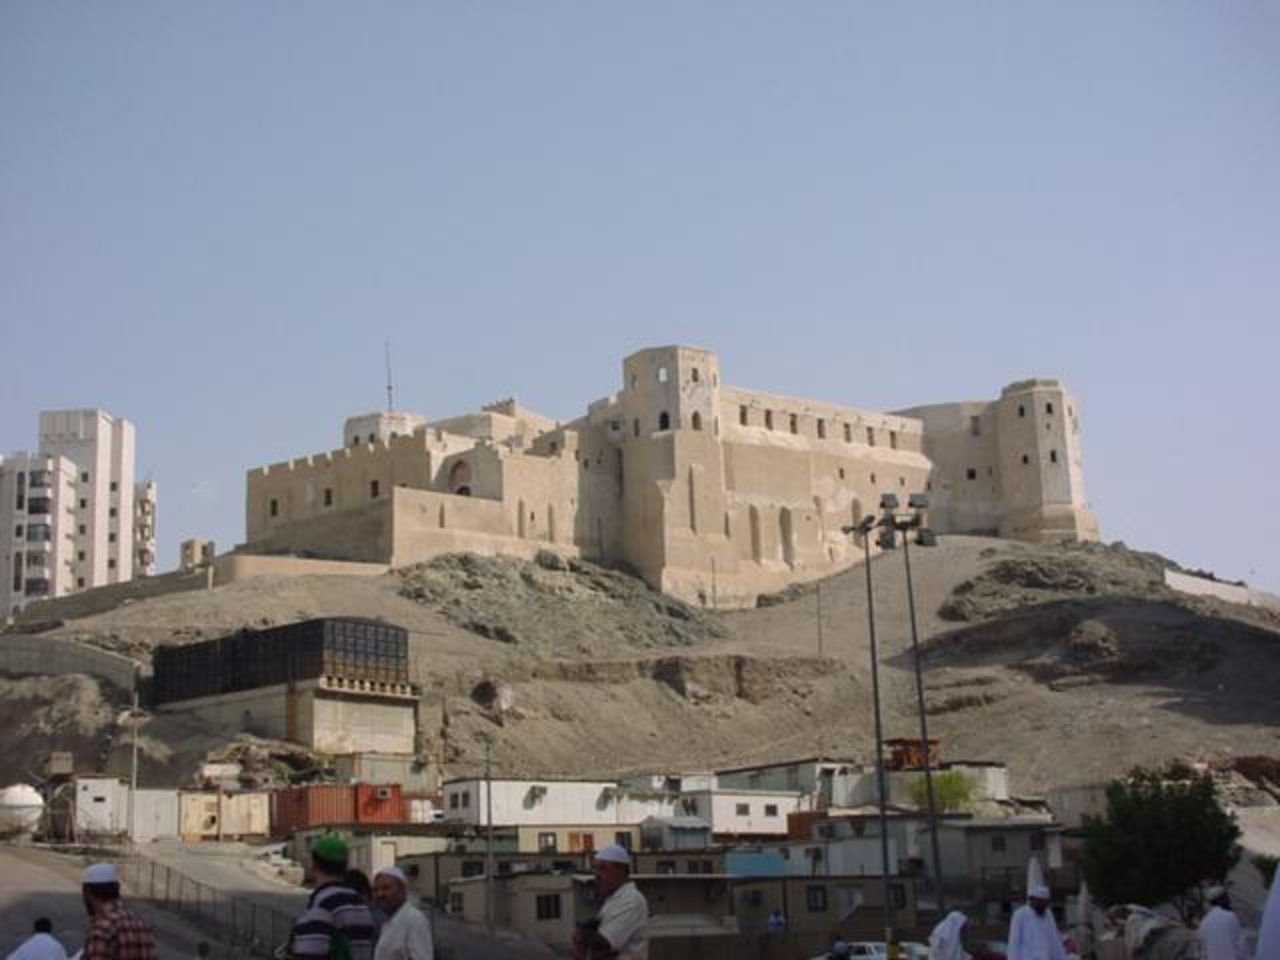 The Al Ajyad fortress was built by the Ottomans in the late 18th century to protect the Kaaba. In 2002, the fortress and the Bulbul Mount on which it stood were leveled, amid protest from the Turkish government, to make way for new developments. Saudi authorities said the fortress would be reconstructed elsewhere, but this has not yet happened. 